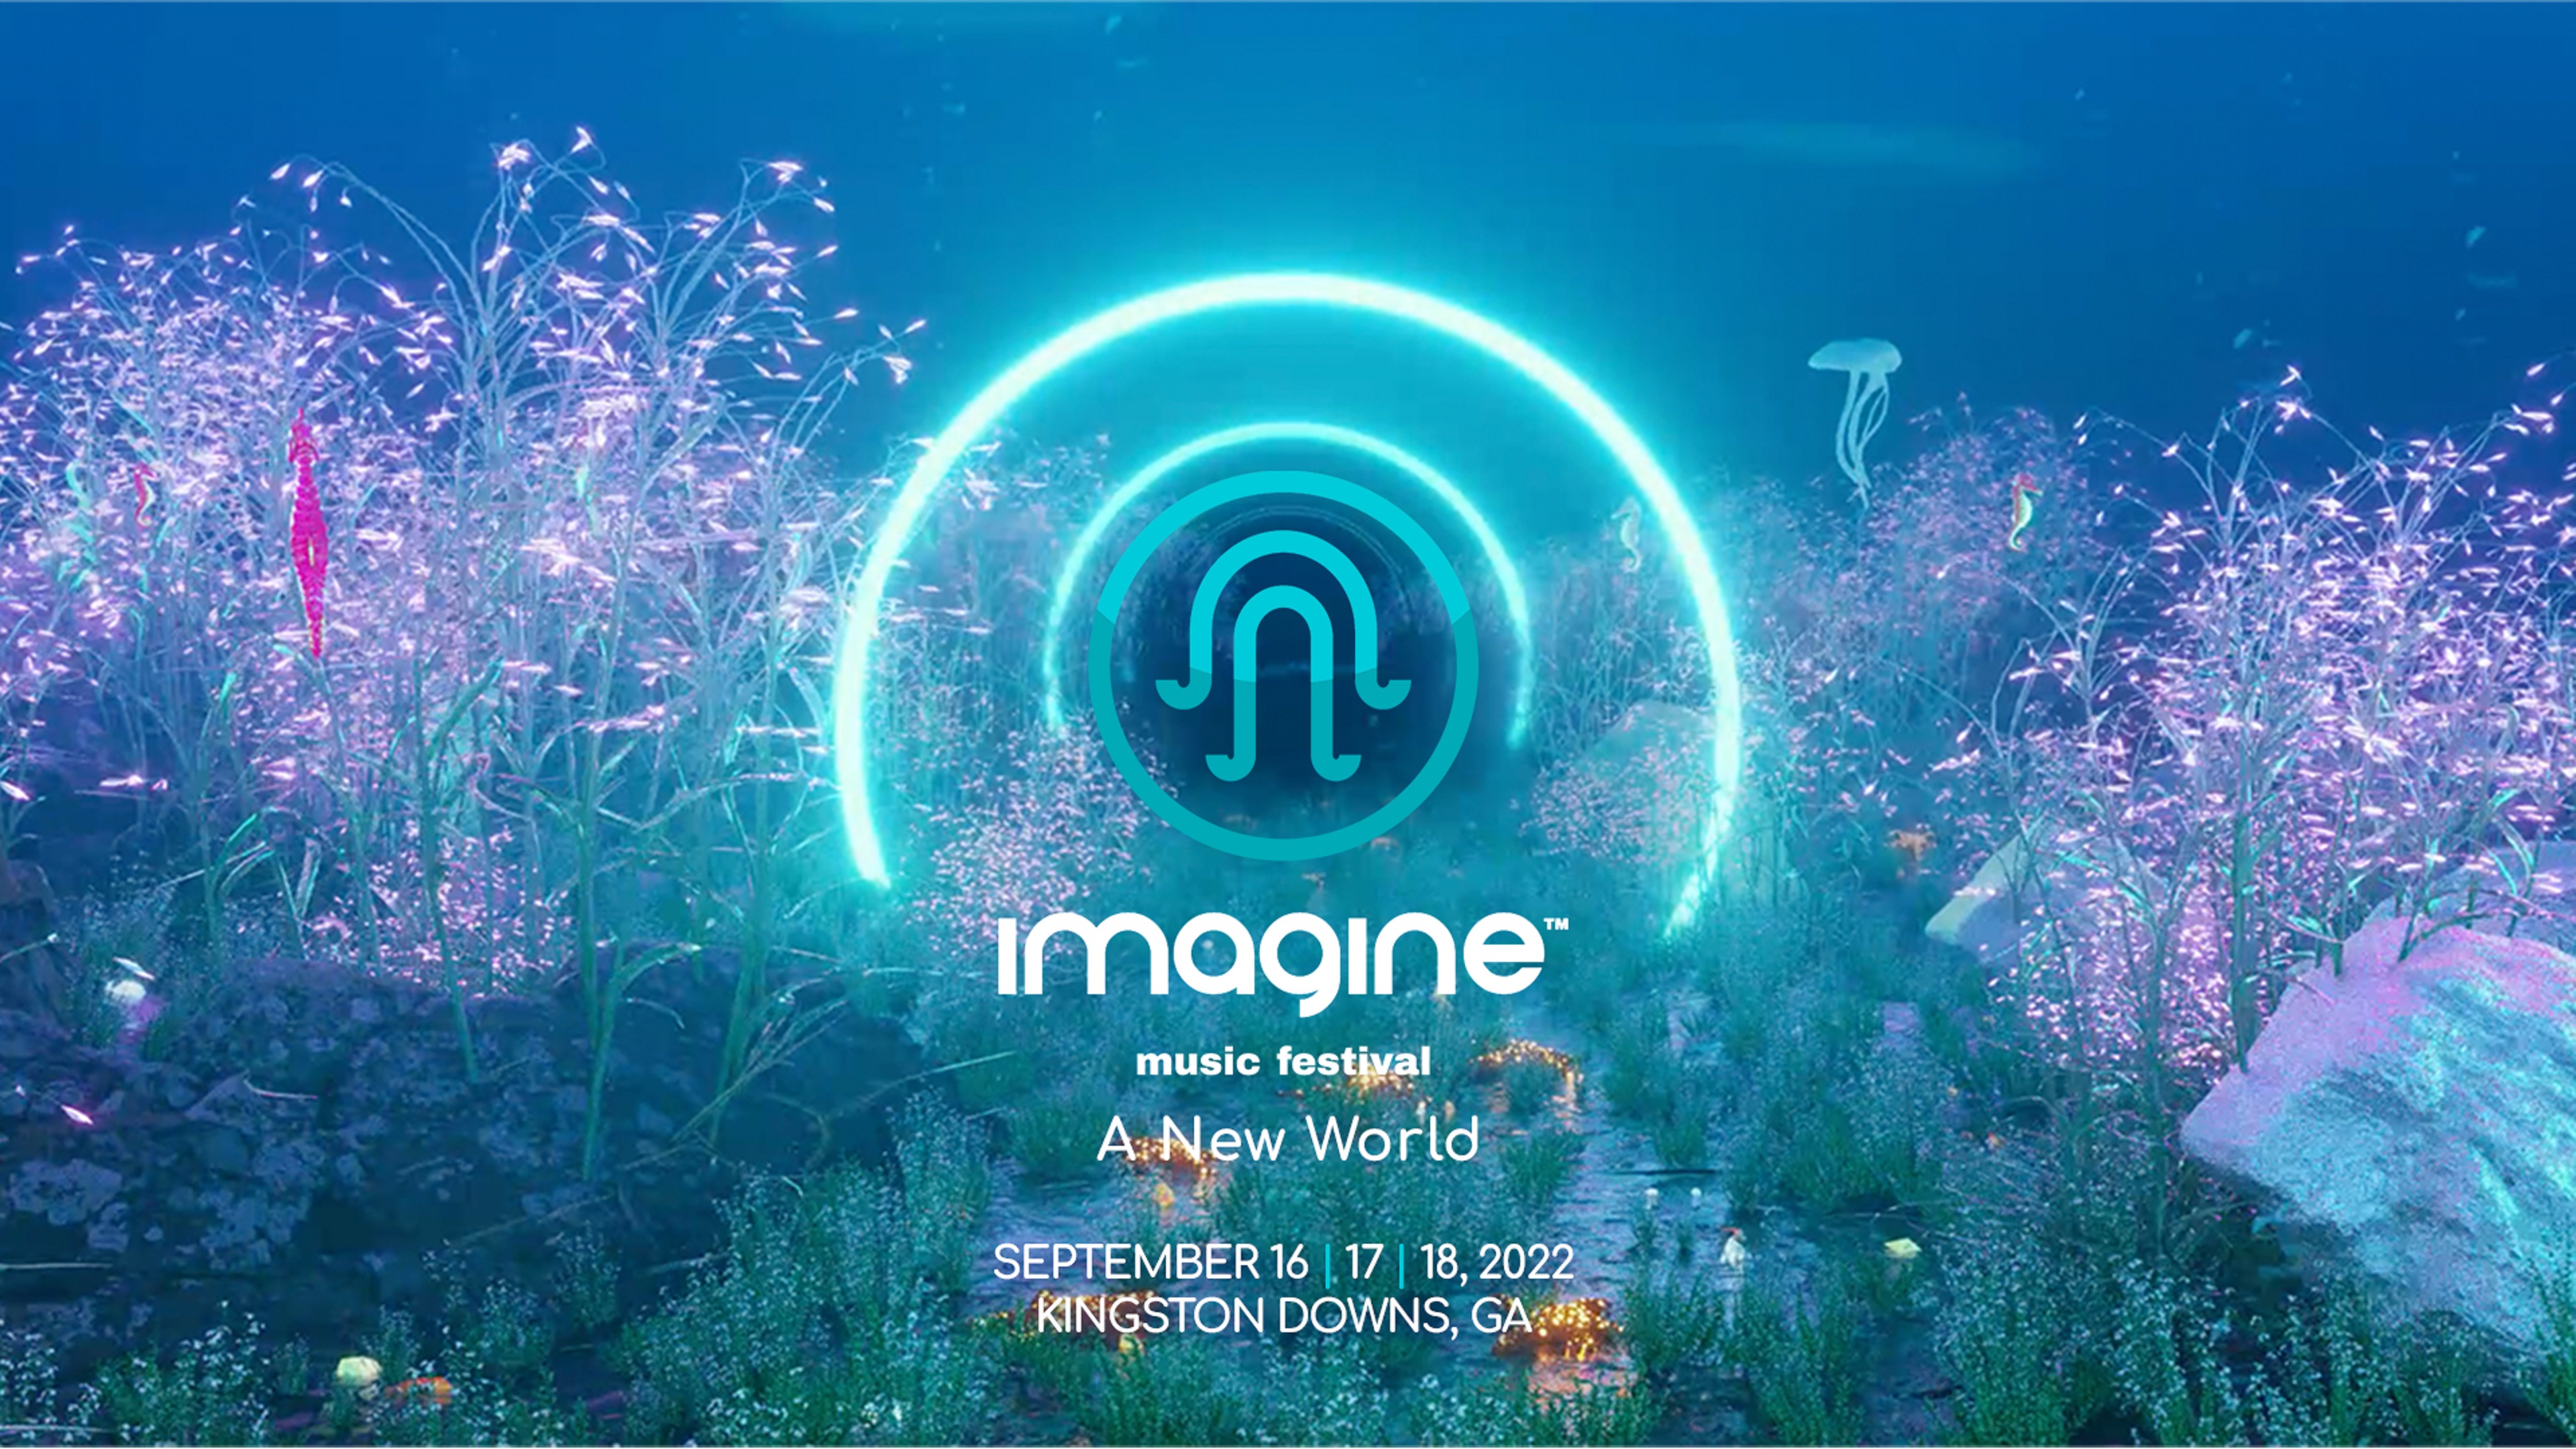 A REIMAGINED IMAGINE MUSIC FESTIVAL DIVES INTO ‘A NEW WORLD' AT KINGSTON DOWNS